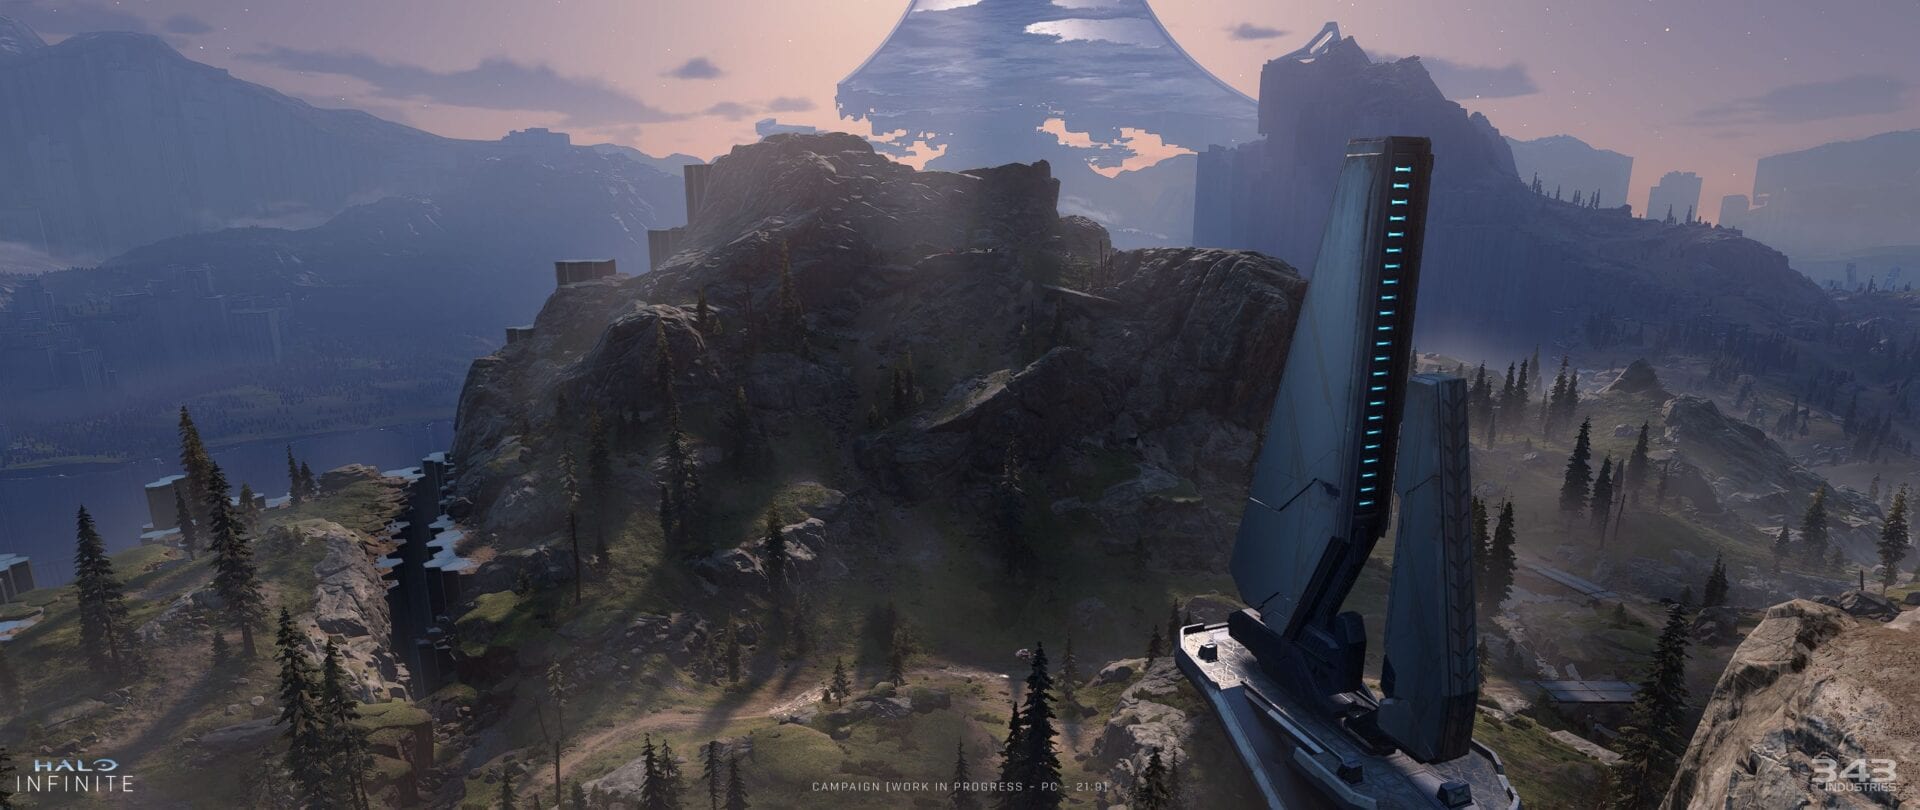 Halo Infinite Gets New Screenshots Showing PC Aspect Ratio, Field of View, & Options